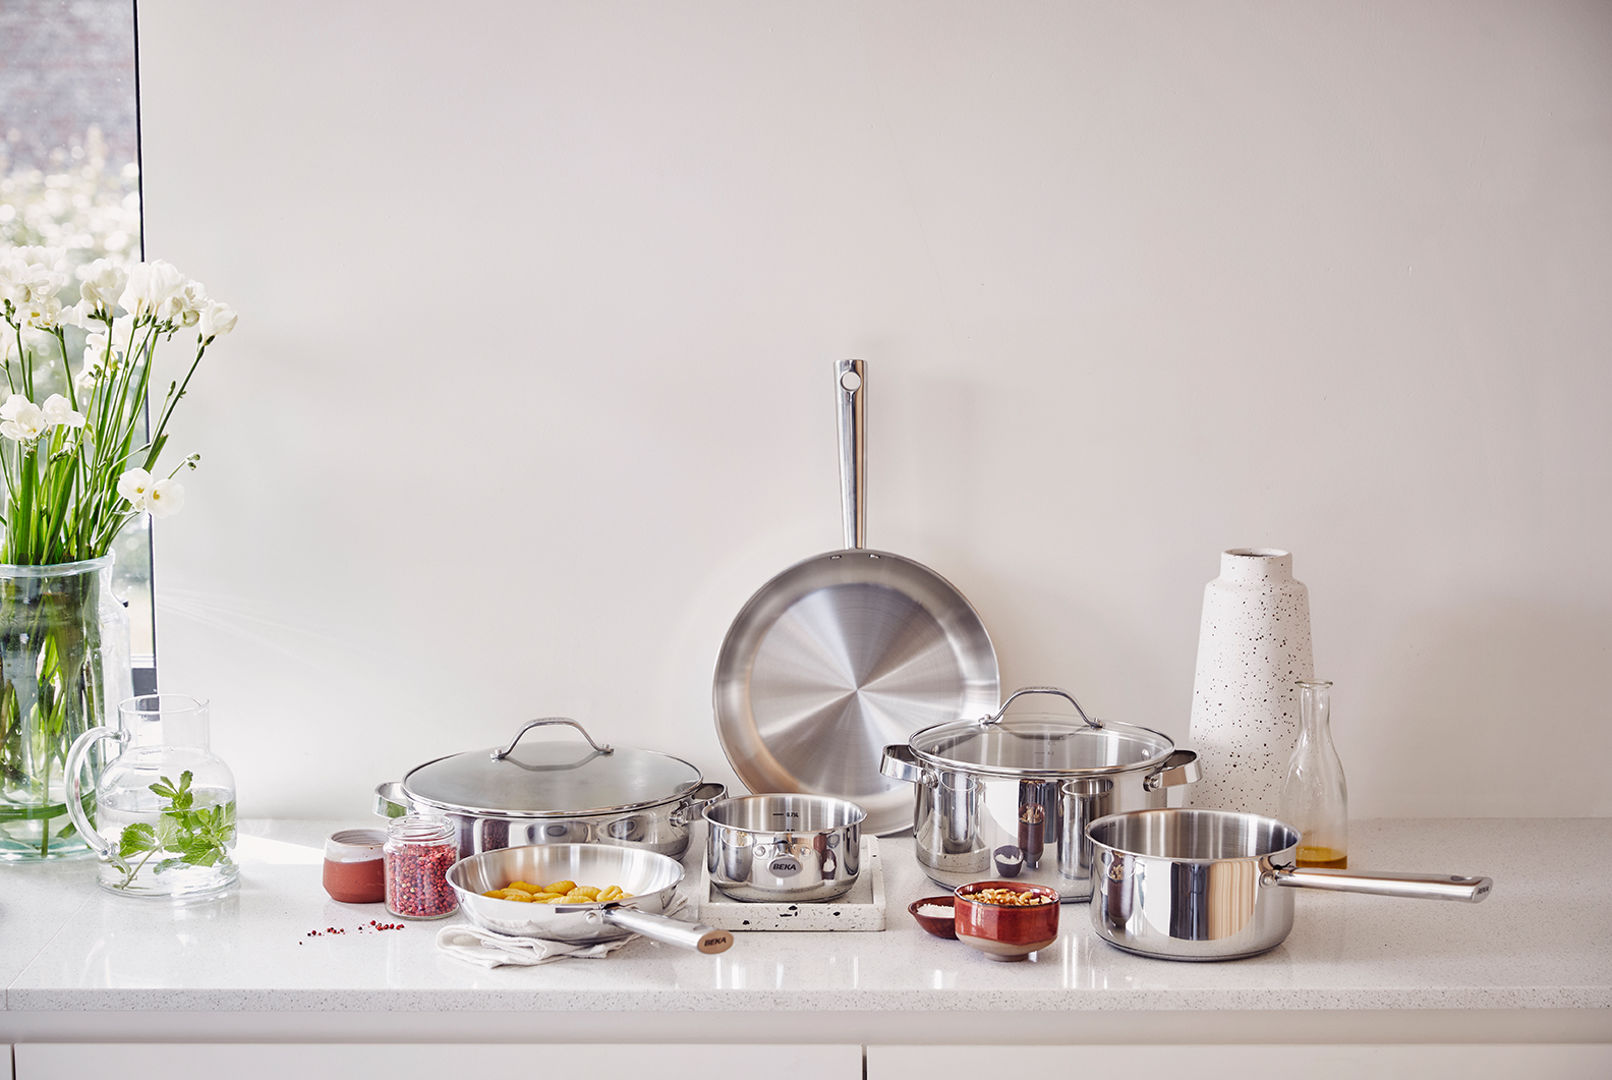 Explore Cicla: Sustainable Cooking with Recycled Materials